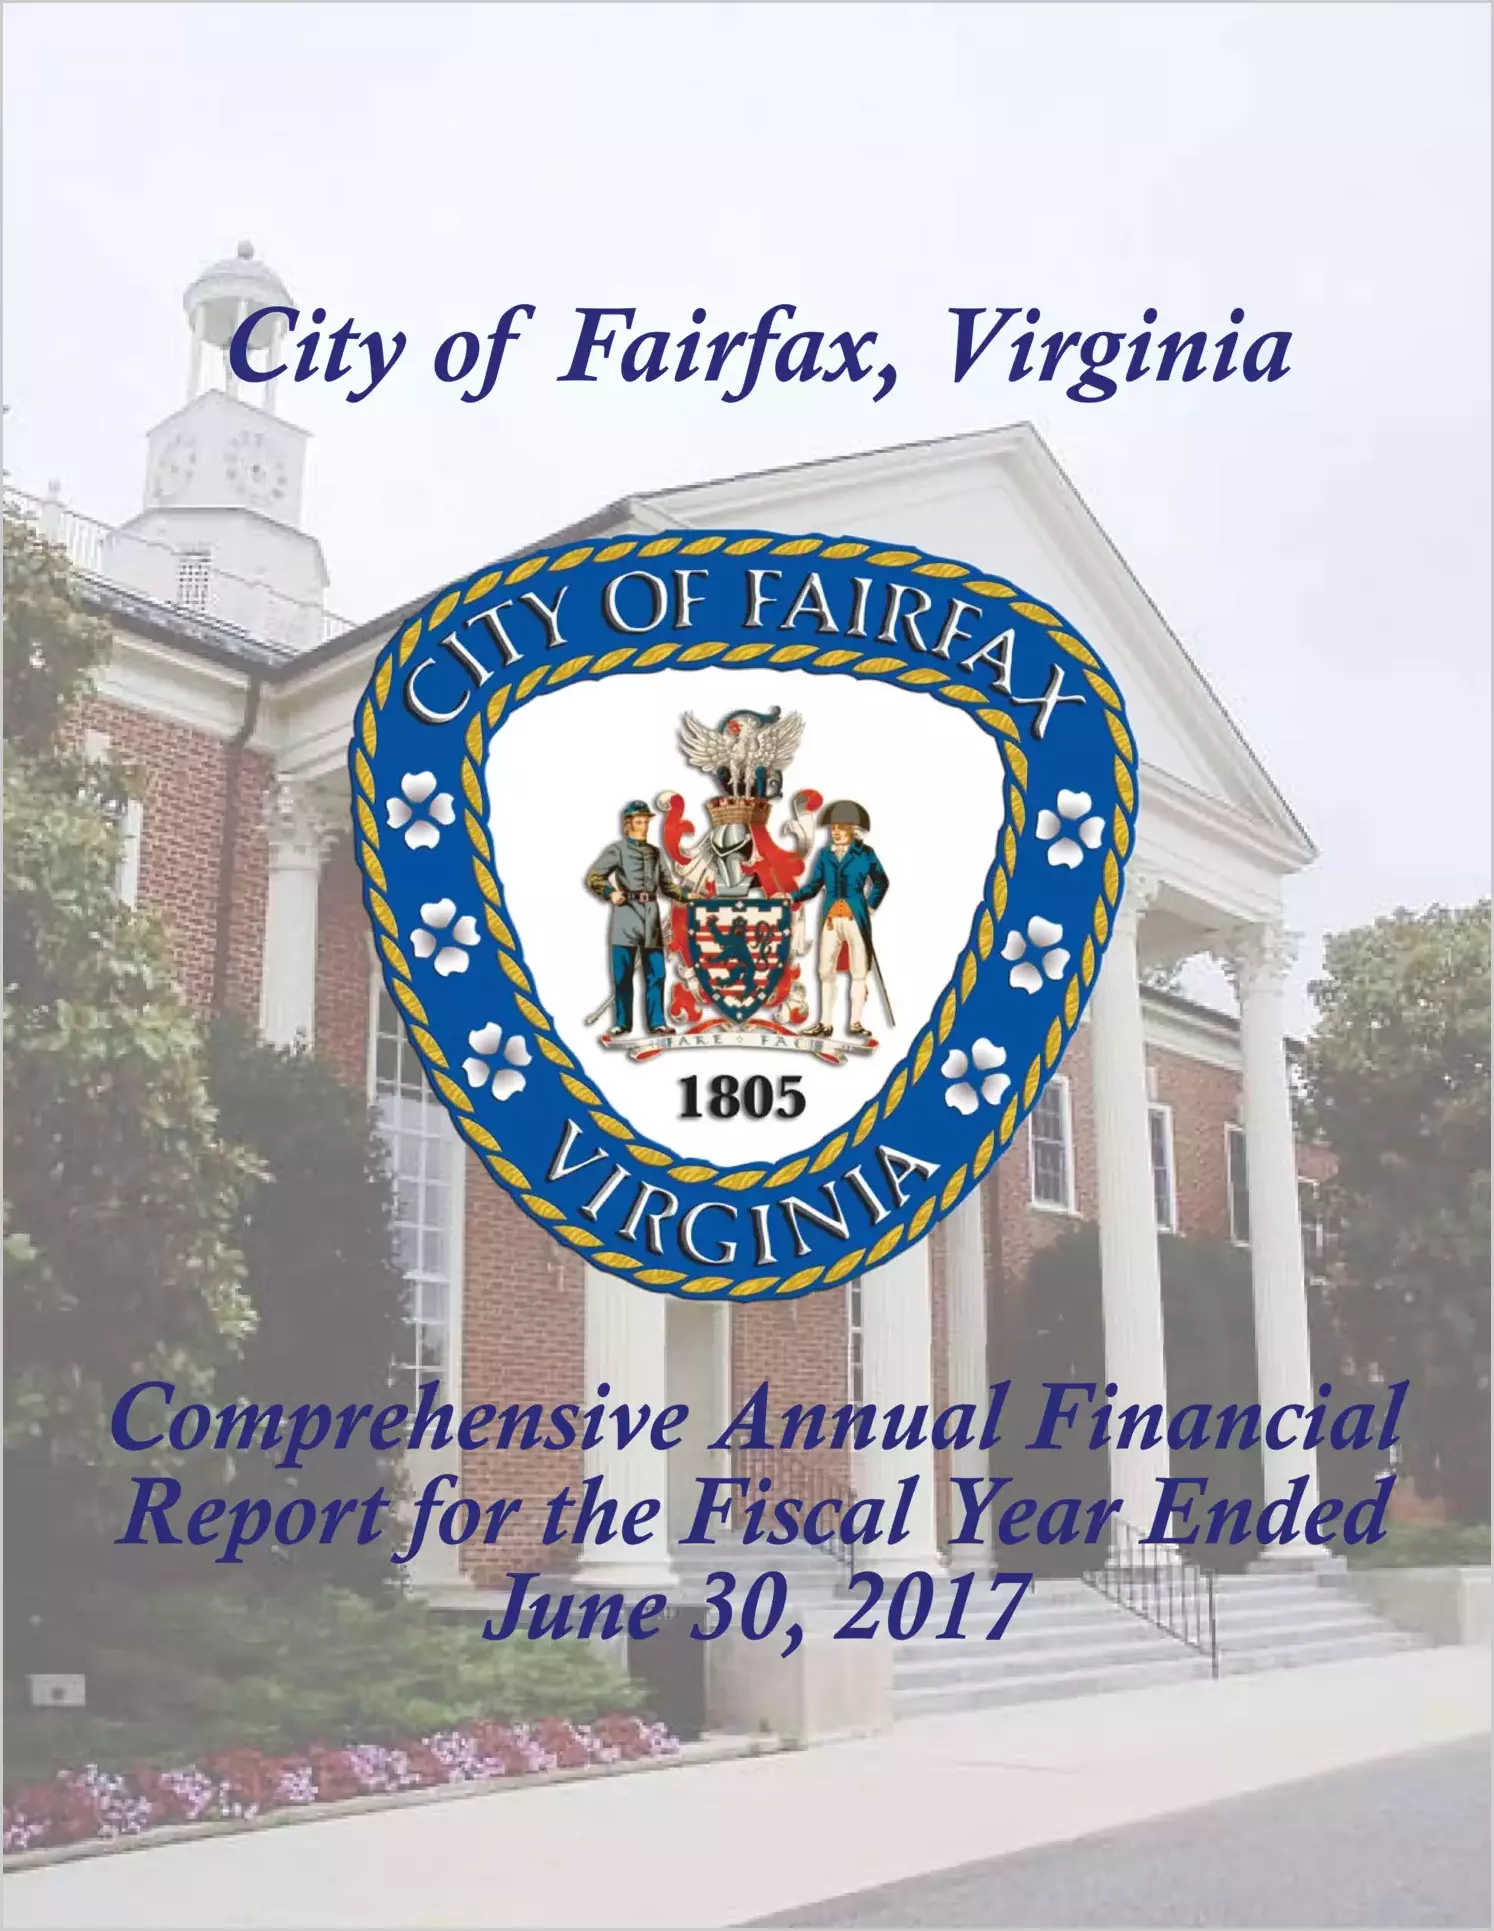 2017 Annual Financial Report for City of Fairfax